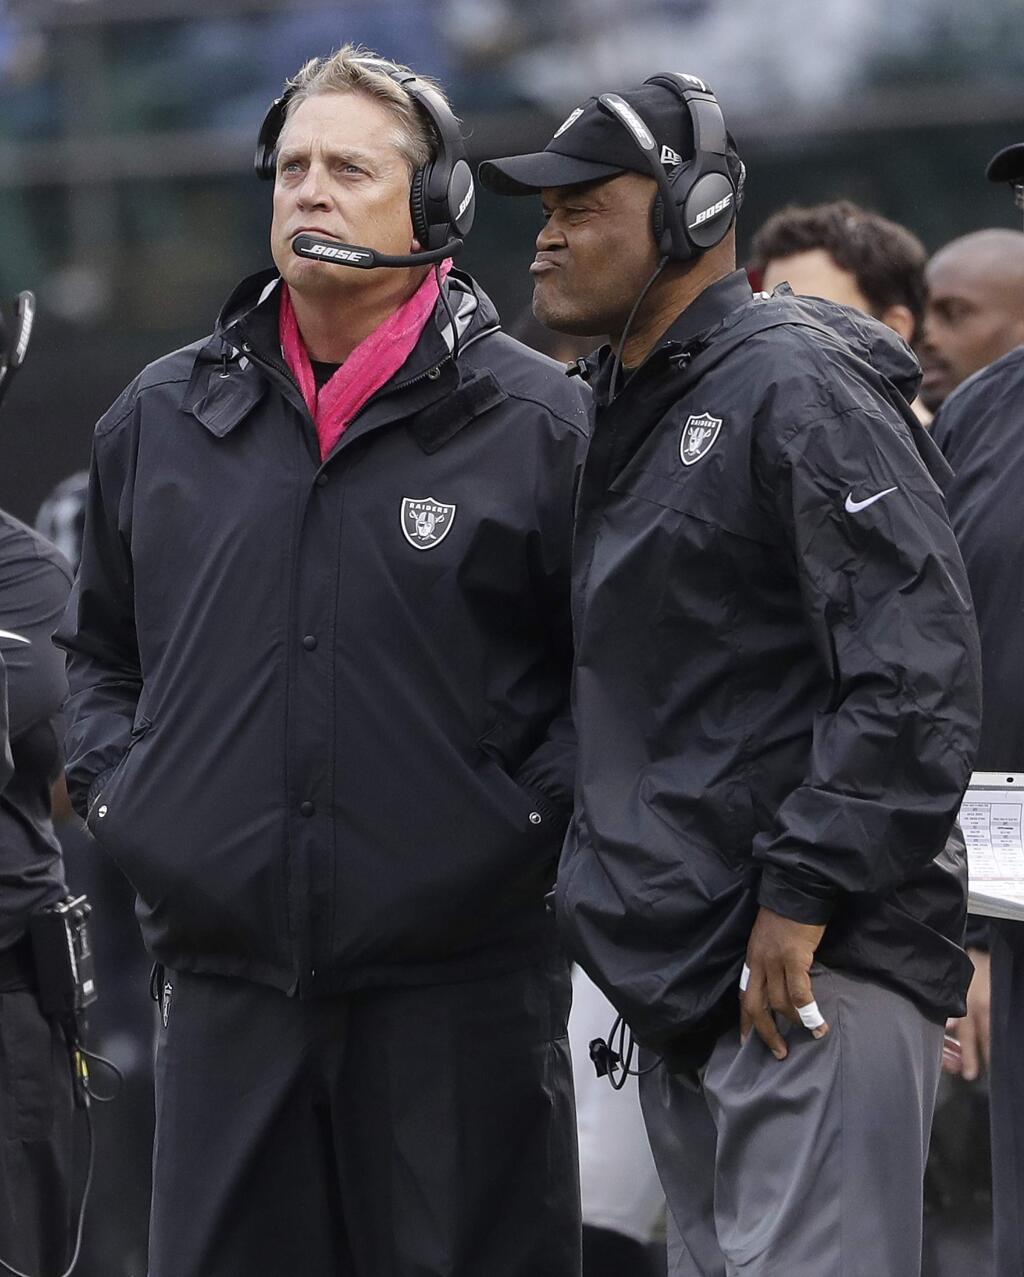 Oakland Raiders head coach Jack Del Rio, left, and defensive coordinator Ken Norton Jr. watch from the sideline during the second half against the Kansas City Chiefs in Oakland, Sunday, Oct. 16, 2016. (AP Photo/Marcio Jose Sanchez)